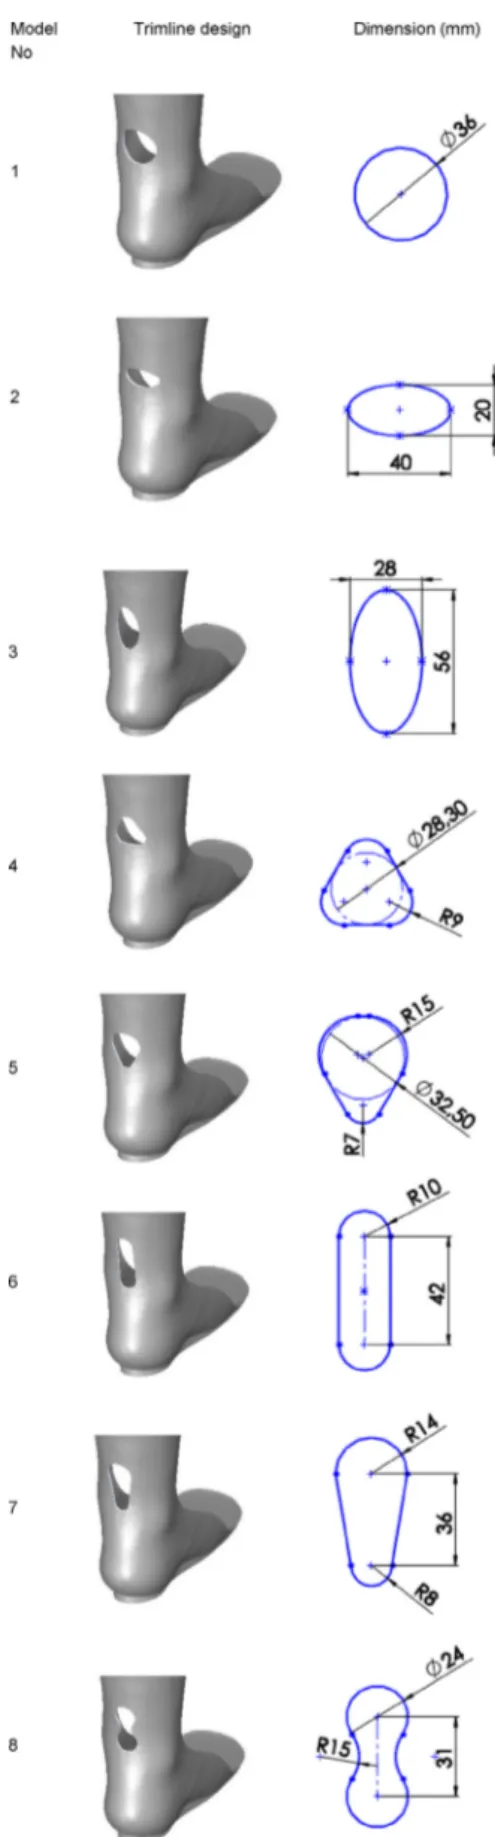 Fig. 4. Dorsal trimline designs with eight alternative geometries determined according to a reference displacement value (9.05 mm).